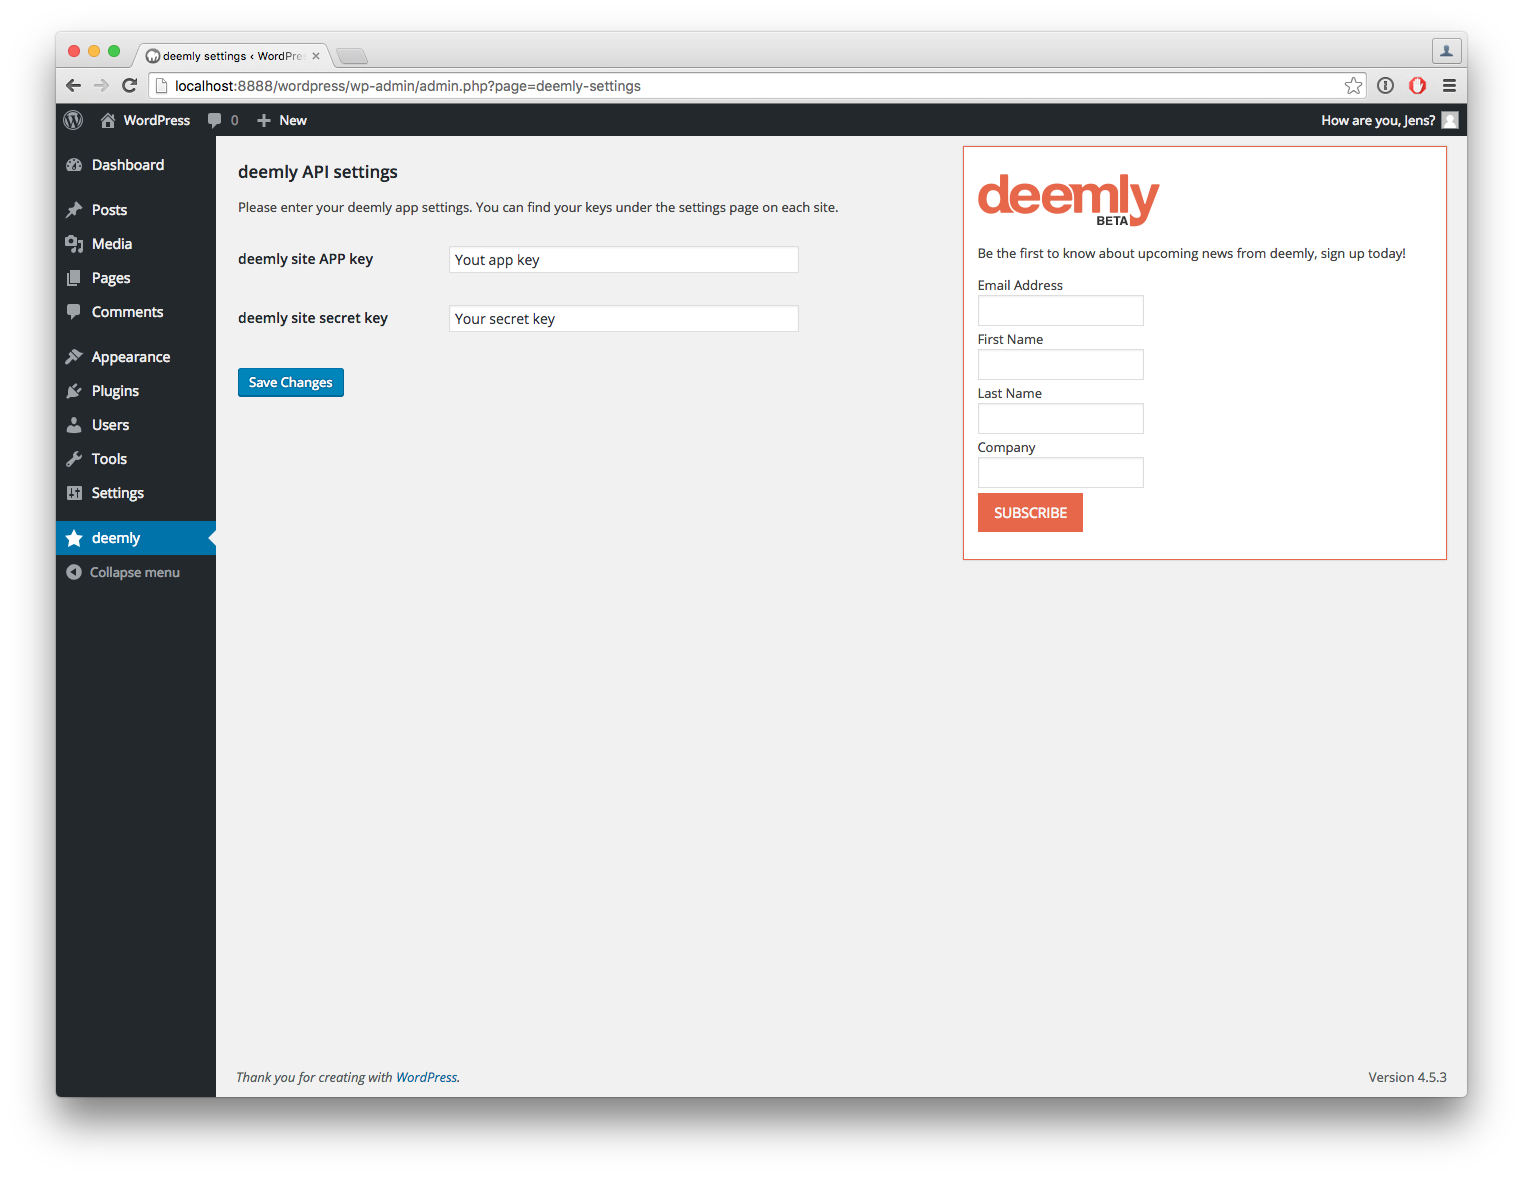 The deemly settings page, where you'll enter your App key and secret key.